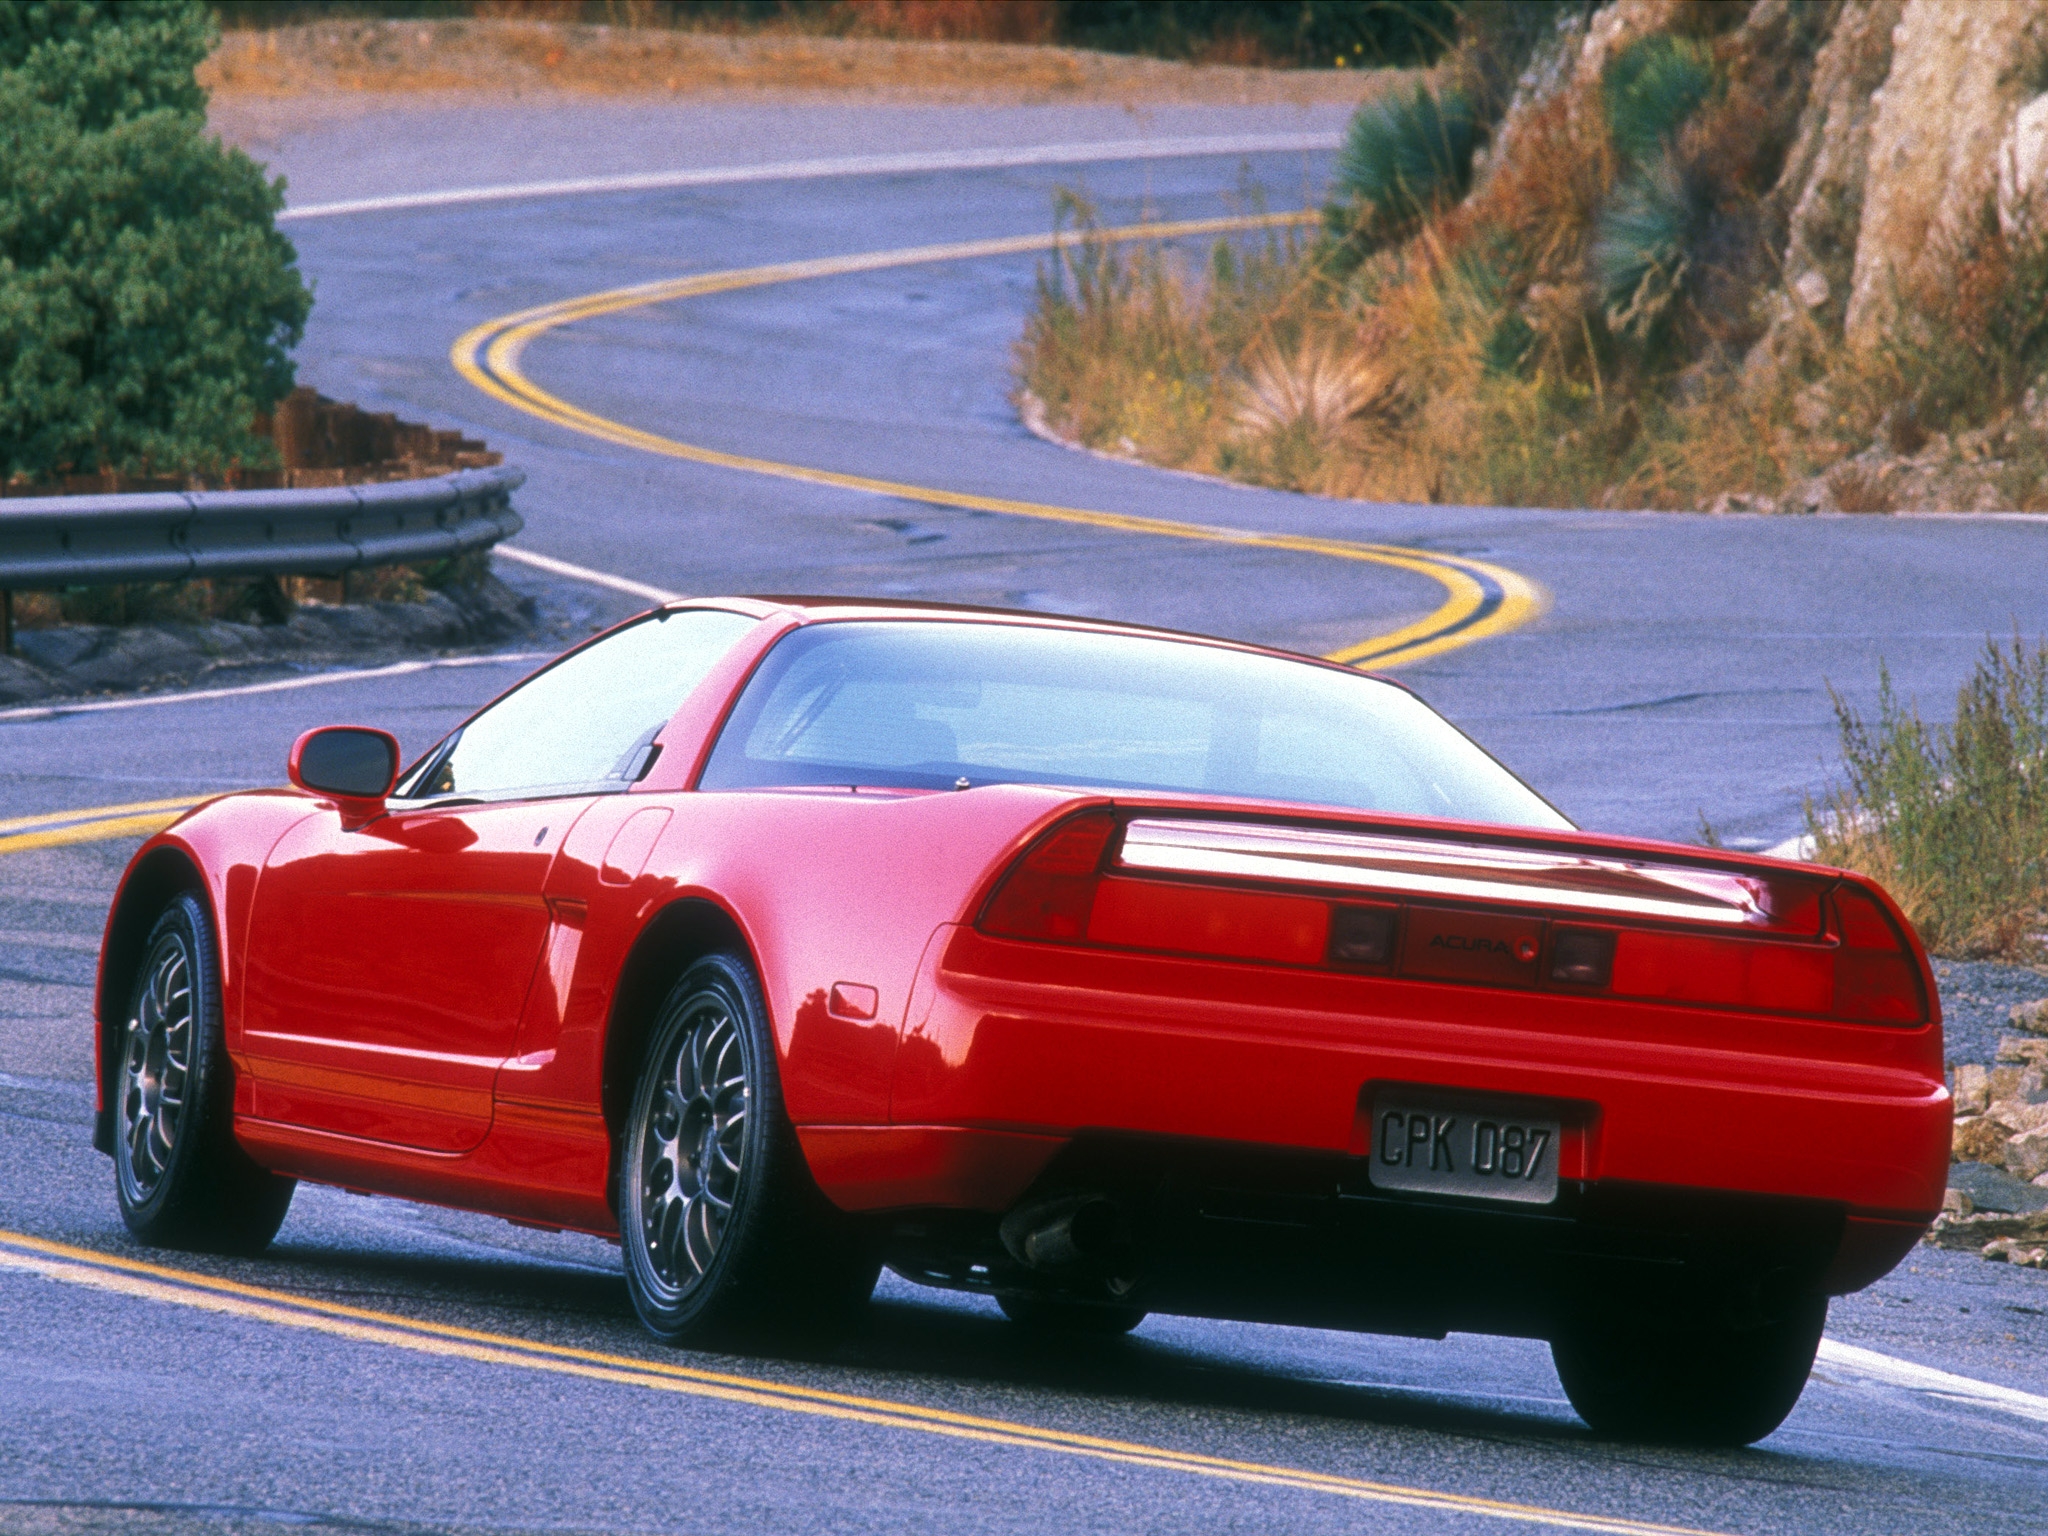 sports, auto, nature, acura, cars, red, rocks, road, back view, rear view, style, akura, 1999, nsx, hsx, nsh HD wallpaper